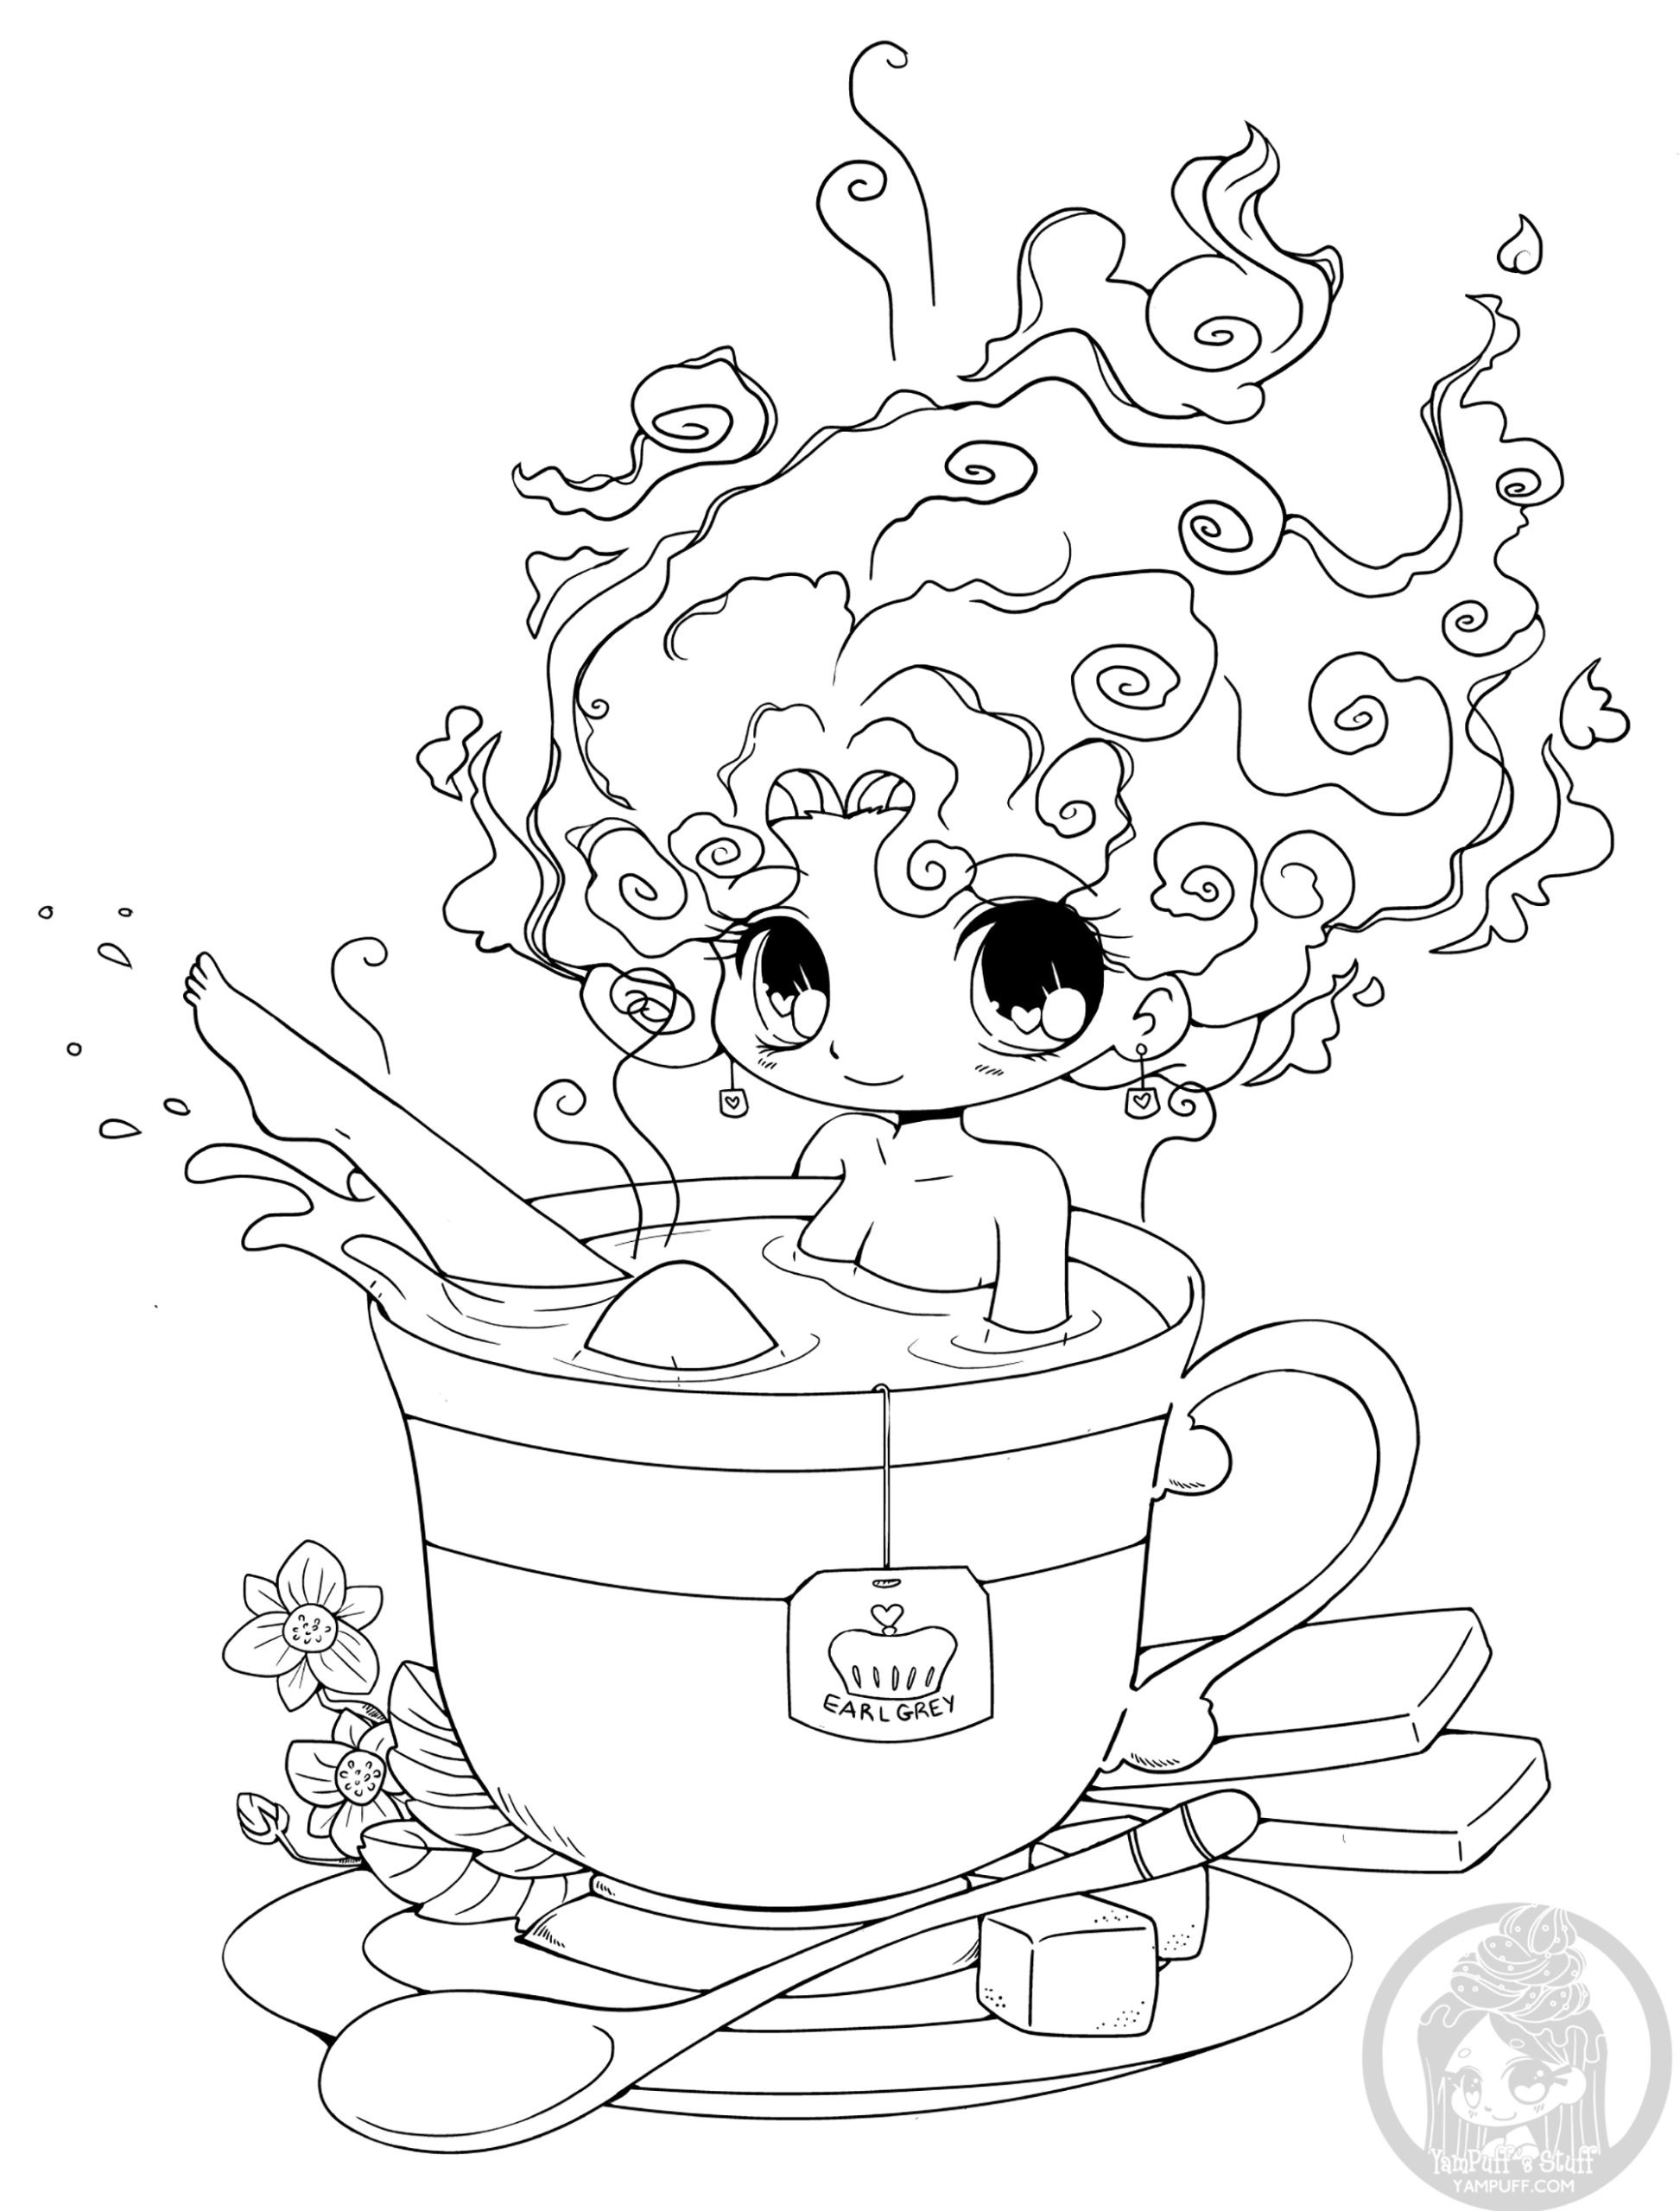 coloring pages : Free Printable Coloring Pages For Children Awesome  Coloring Pages No Problem Yampuff Coloring For Girls Hot Free Printable Coloring  Pages for Children ~ affiliateprogrambook.com